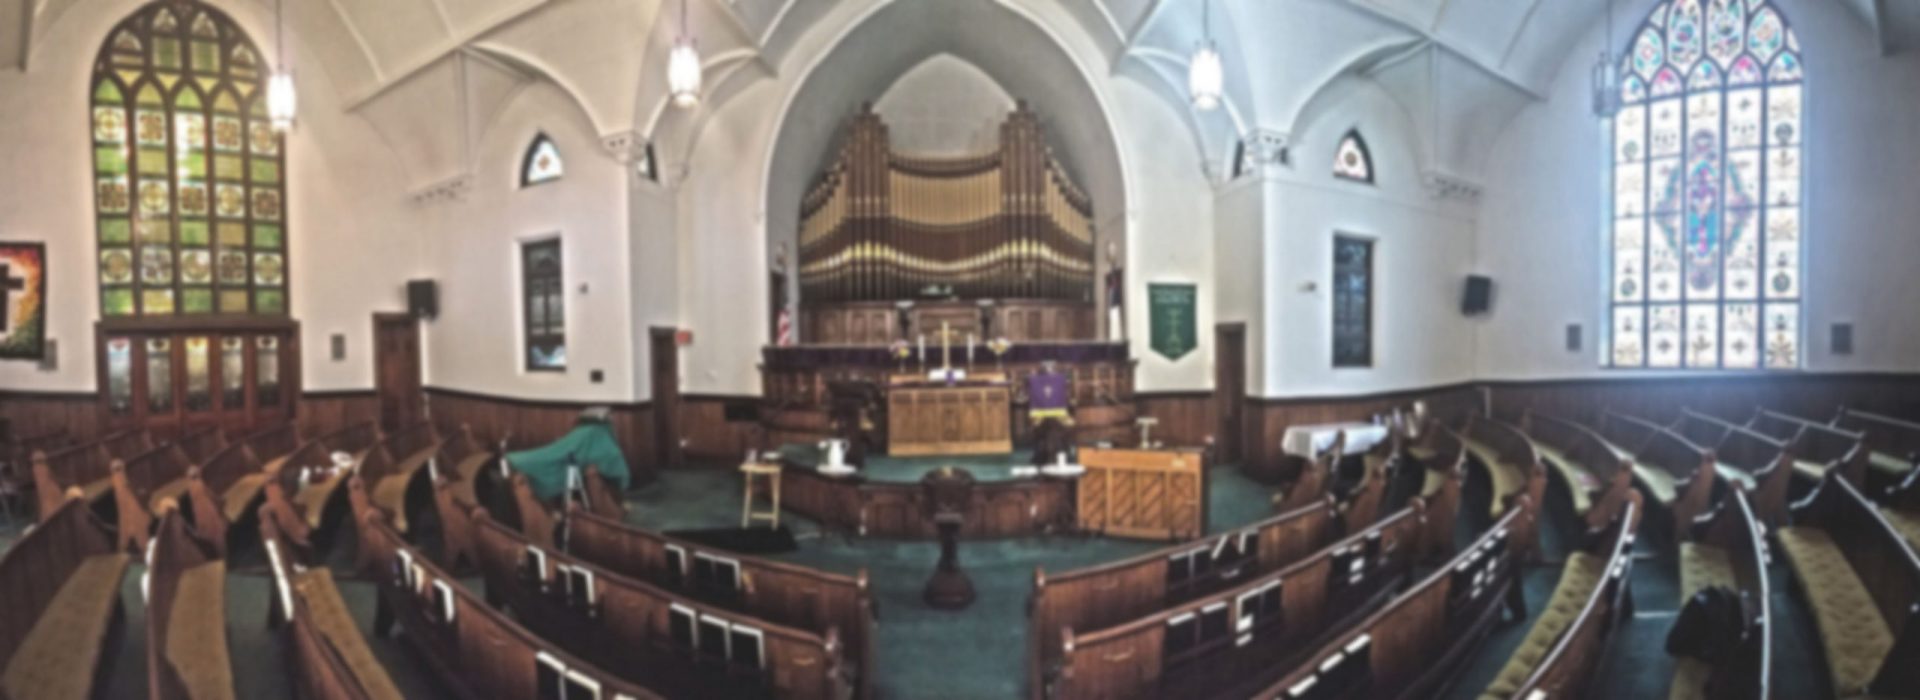 panoramic picture of church sanctuary